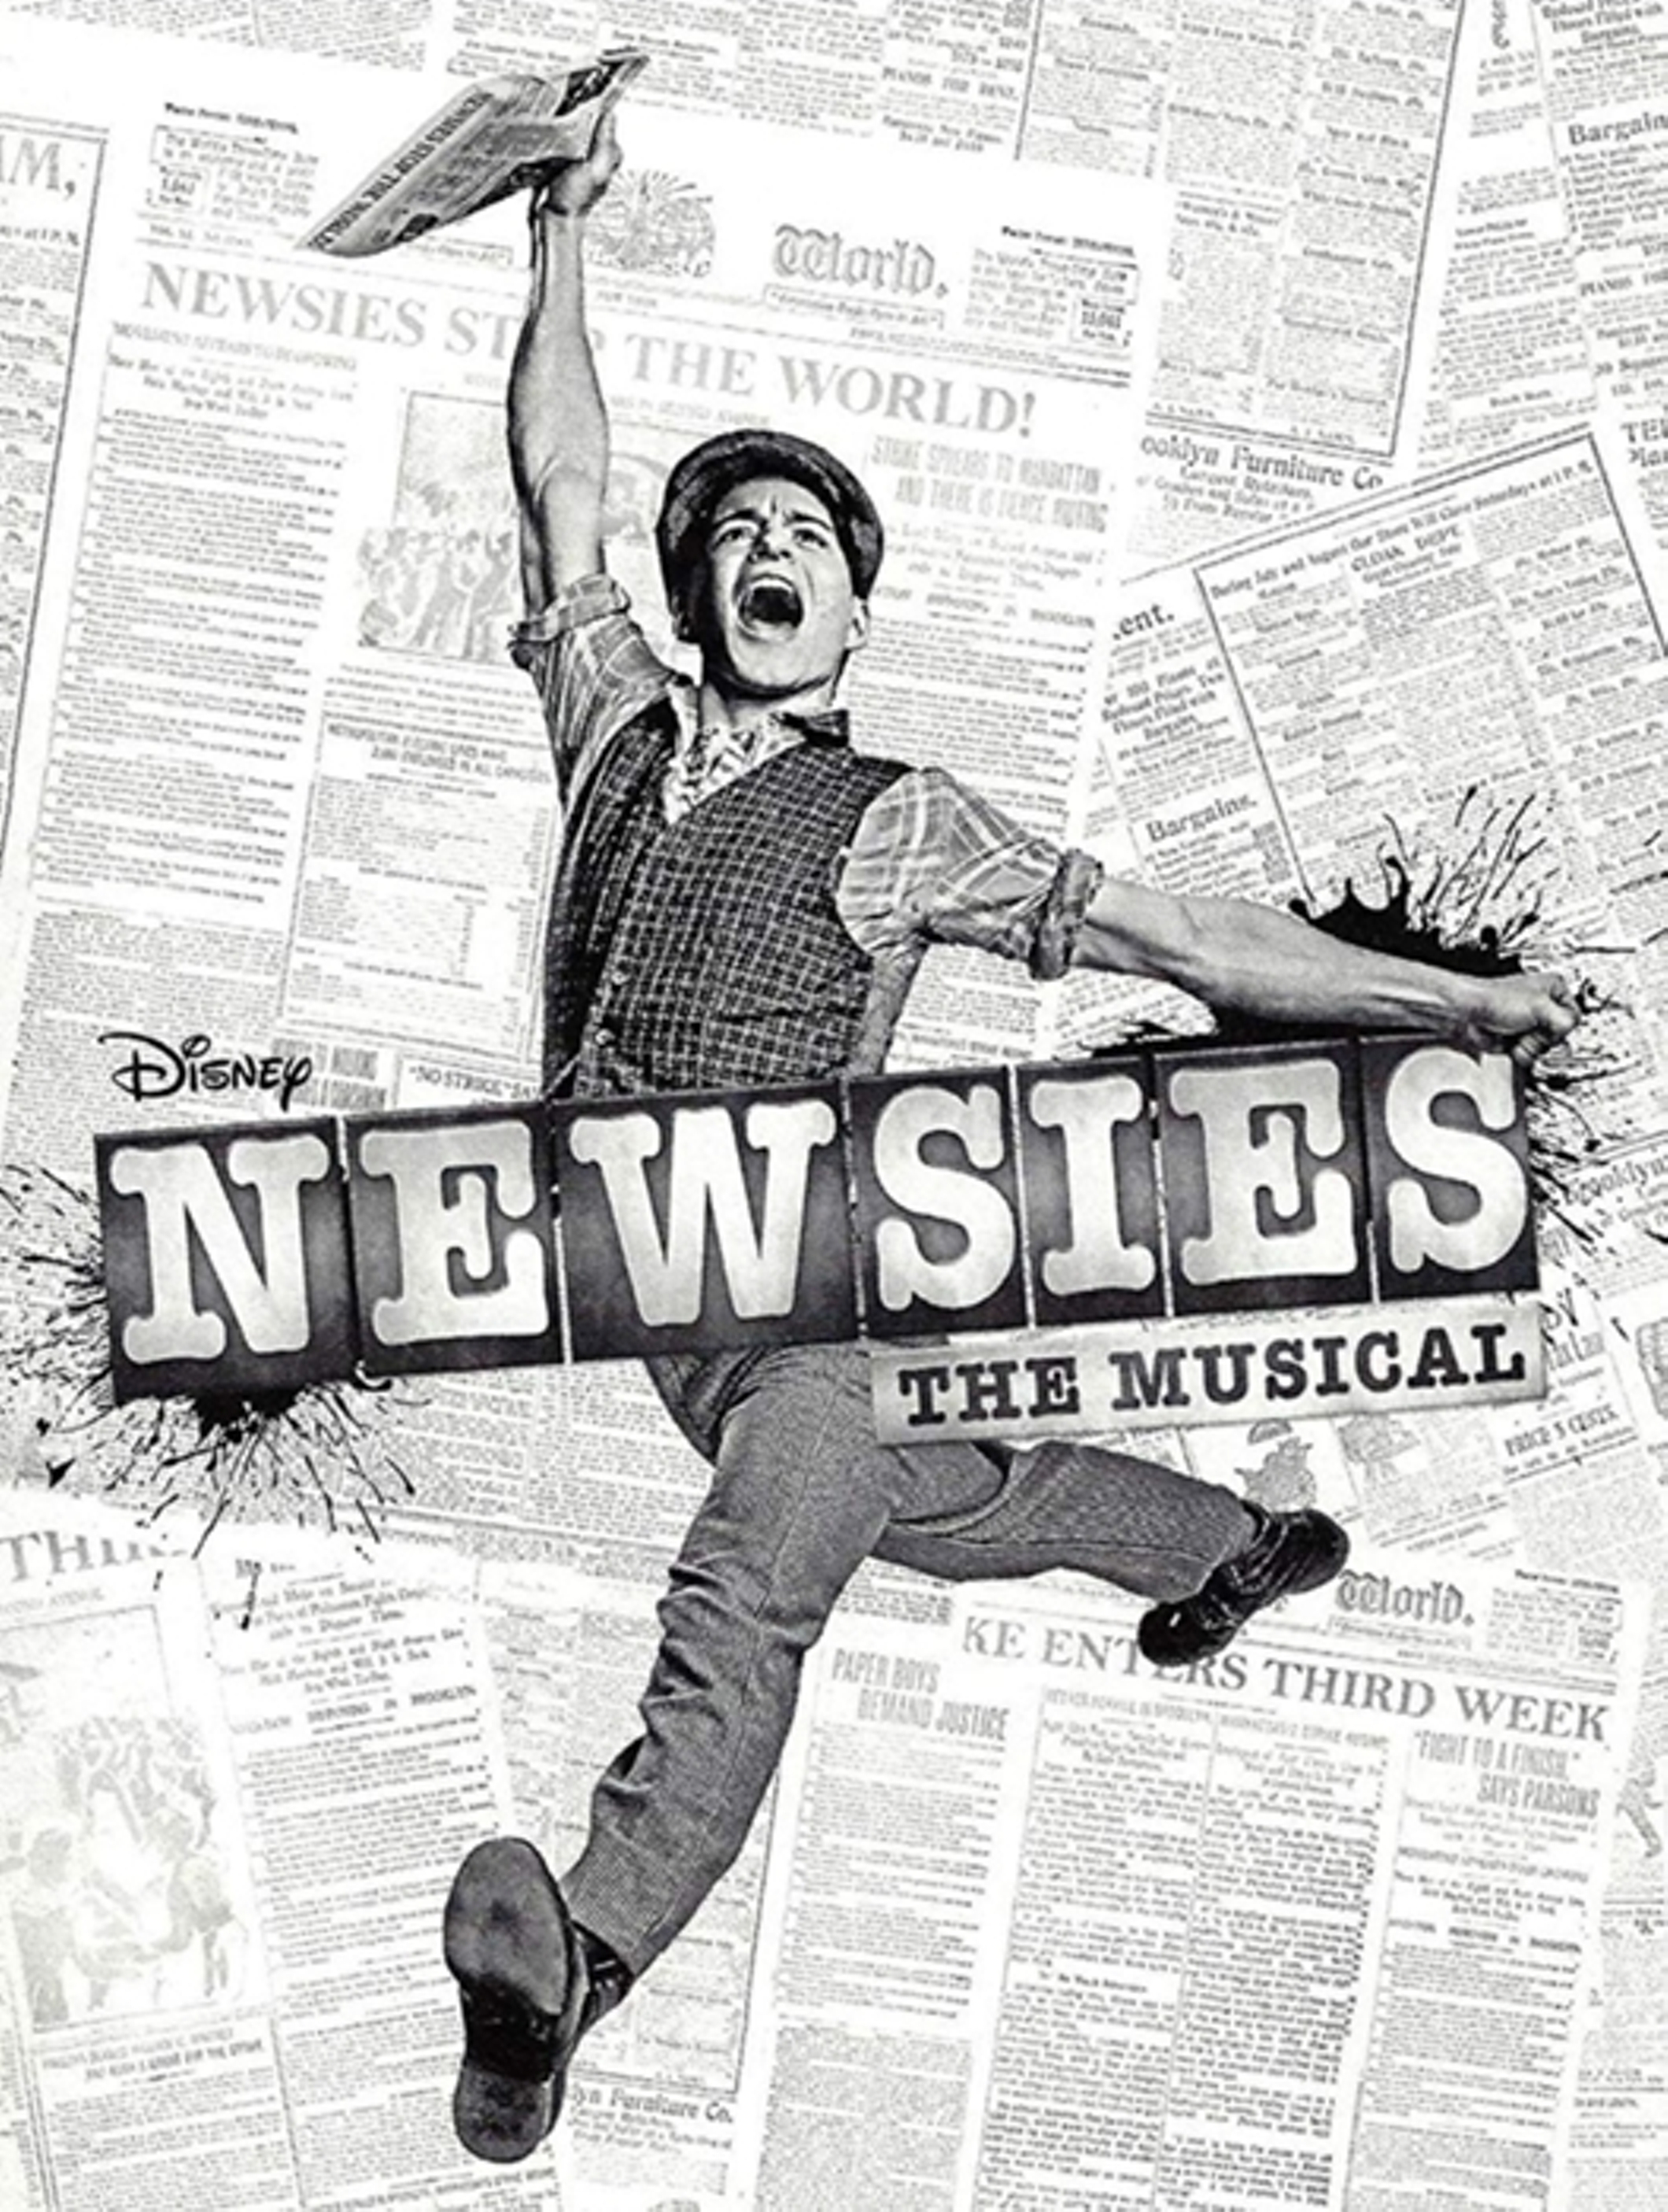 Newsies At Lamoille Union High School Performances November 7 19 To November 9 19 Cover